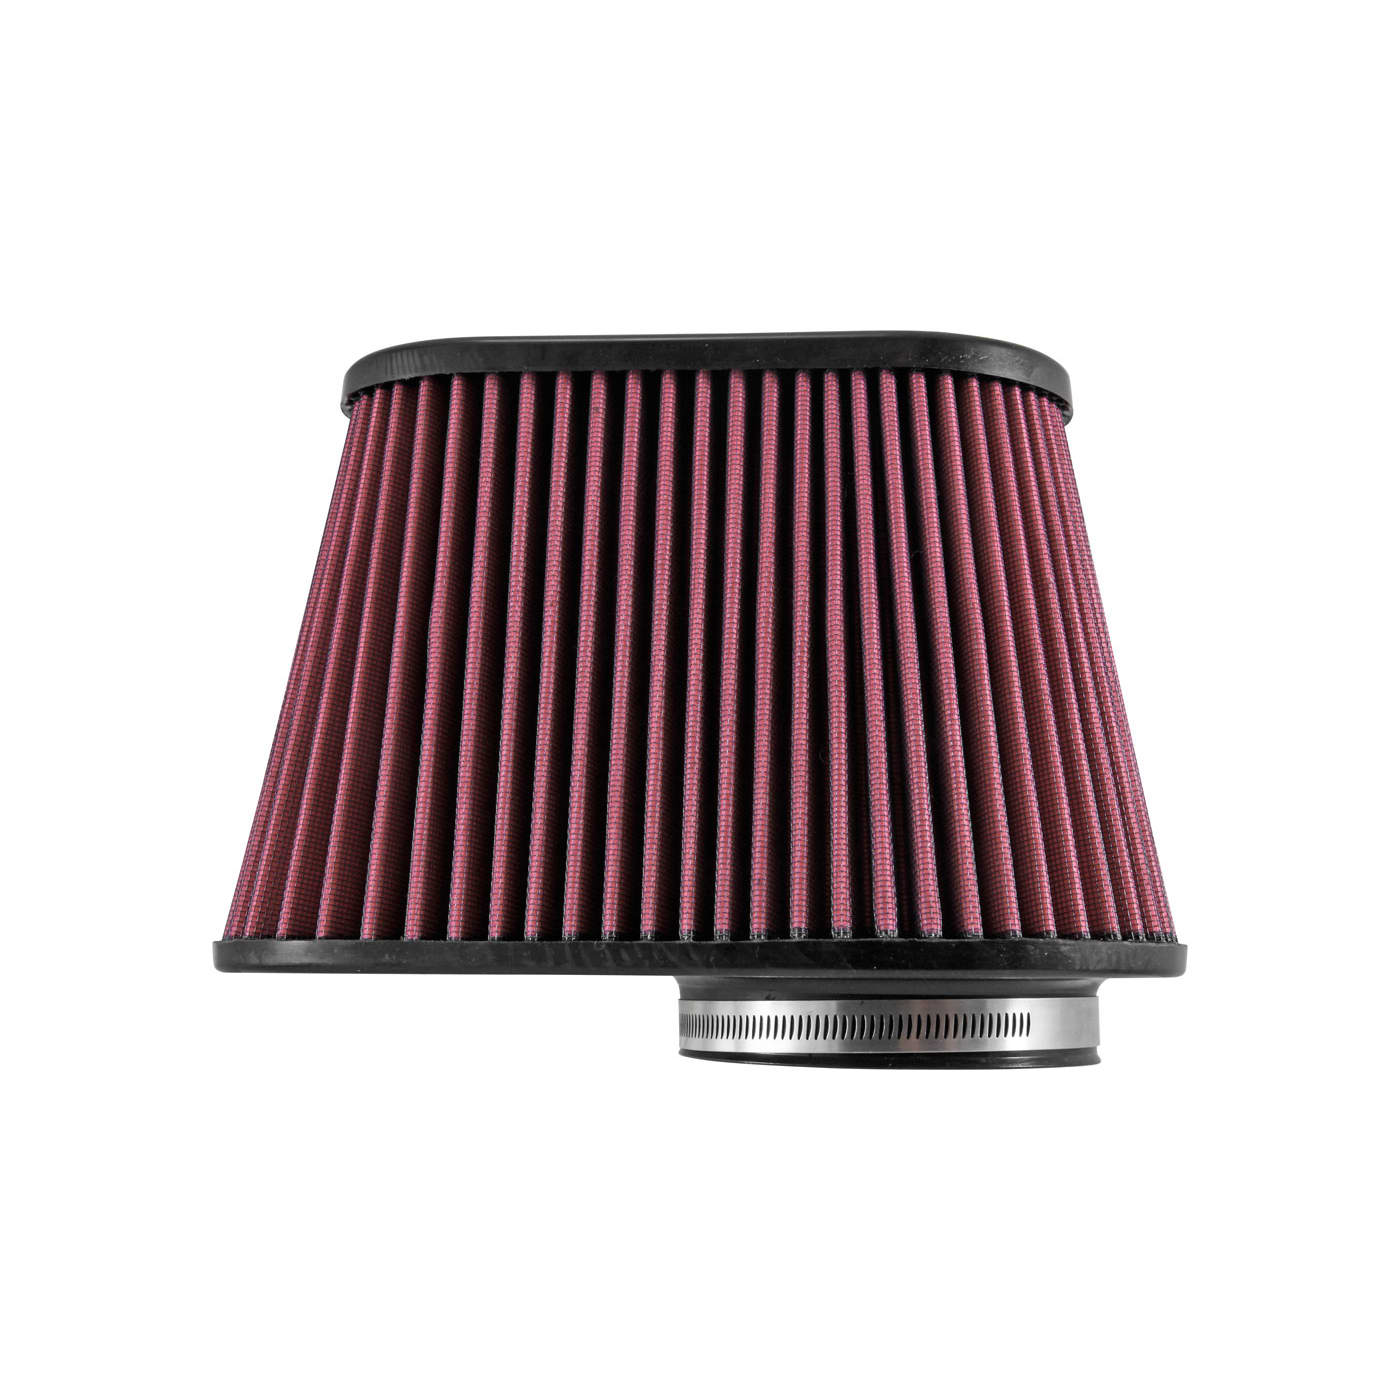 152 mm 233 mm x 191 mm Height; 9.156 in x 7.5 in Top AIR-720-243 203 mm 162 mm x98 mm Airaid 720-243 Universal Clamp-On Air Filter: Oval Tapered; 6 in Base; 6.375 in x 3.875 in Flange ID; 8 in 